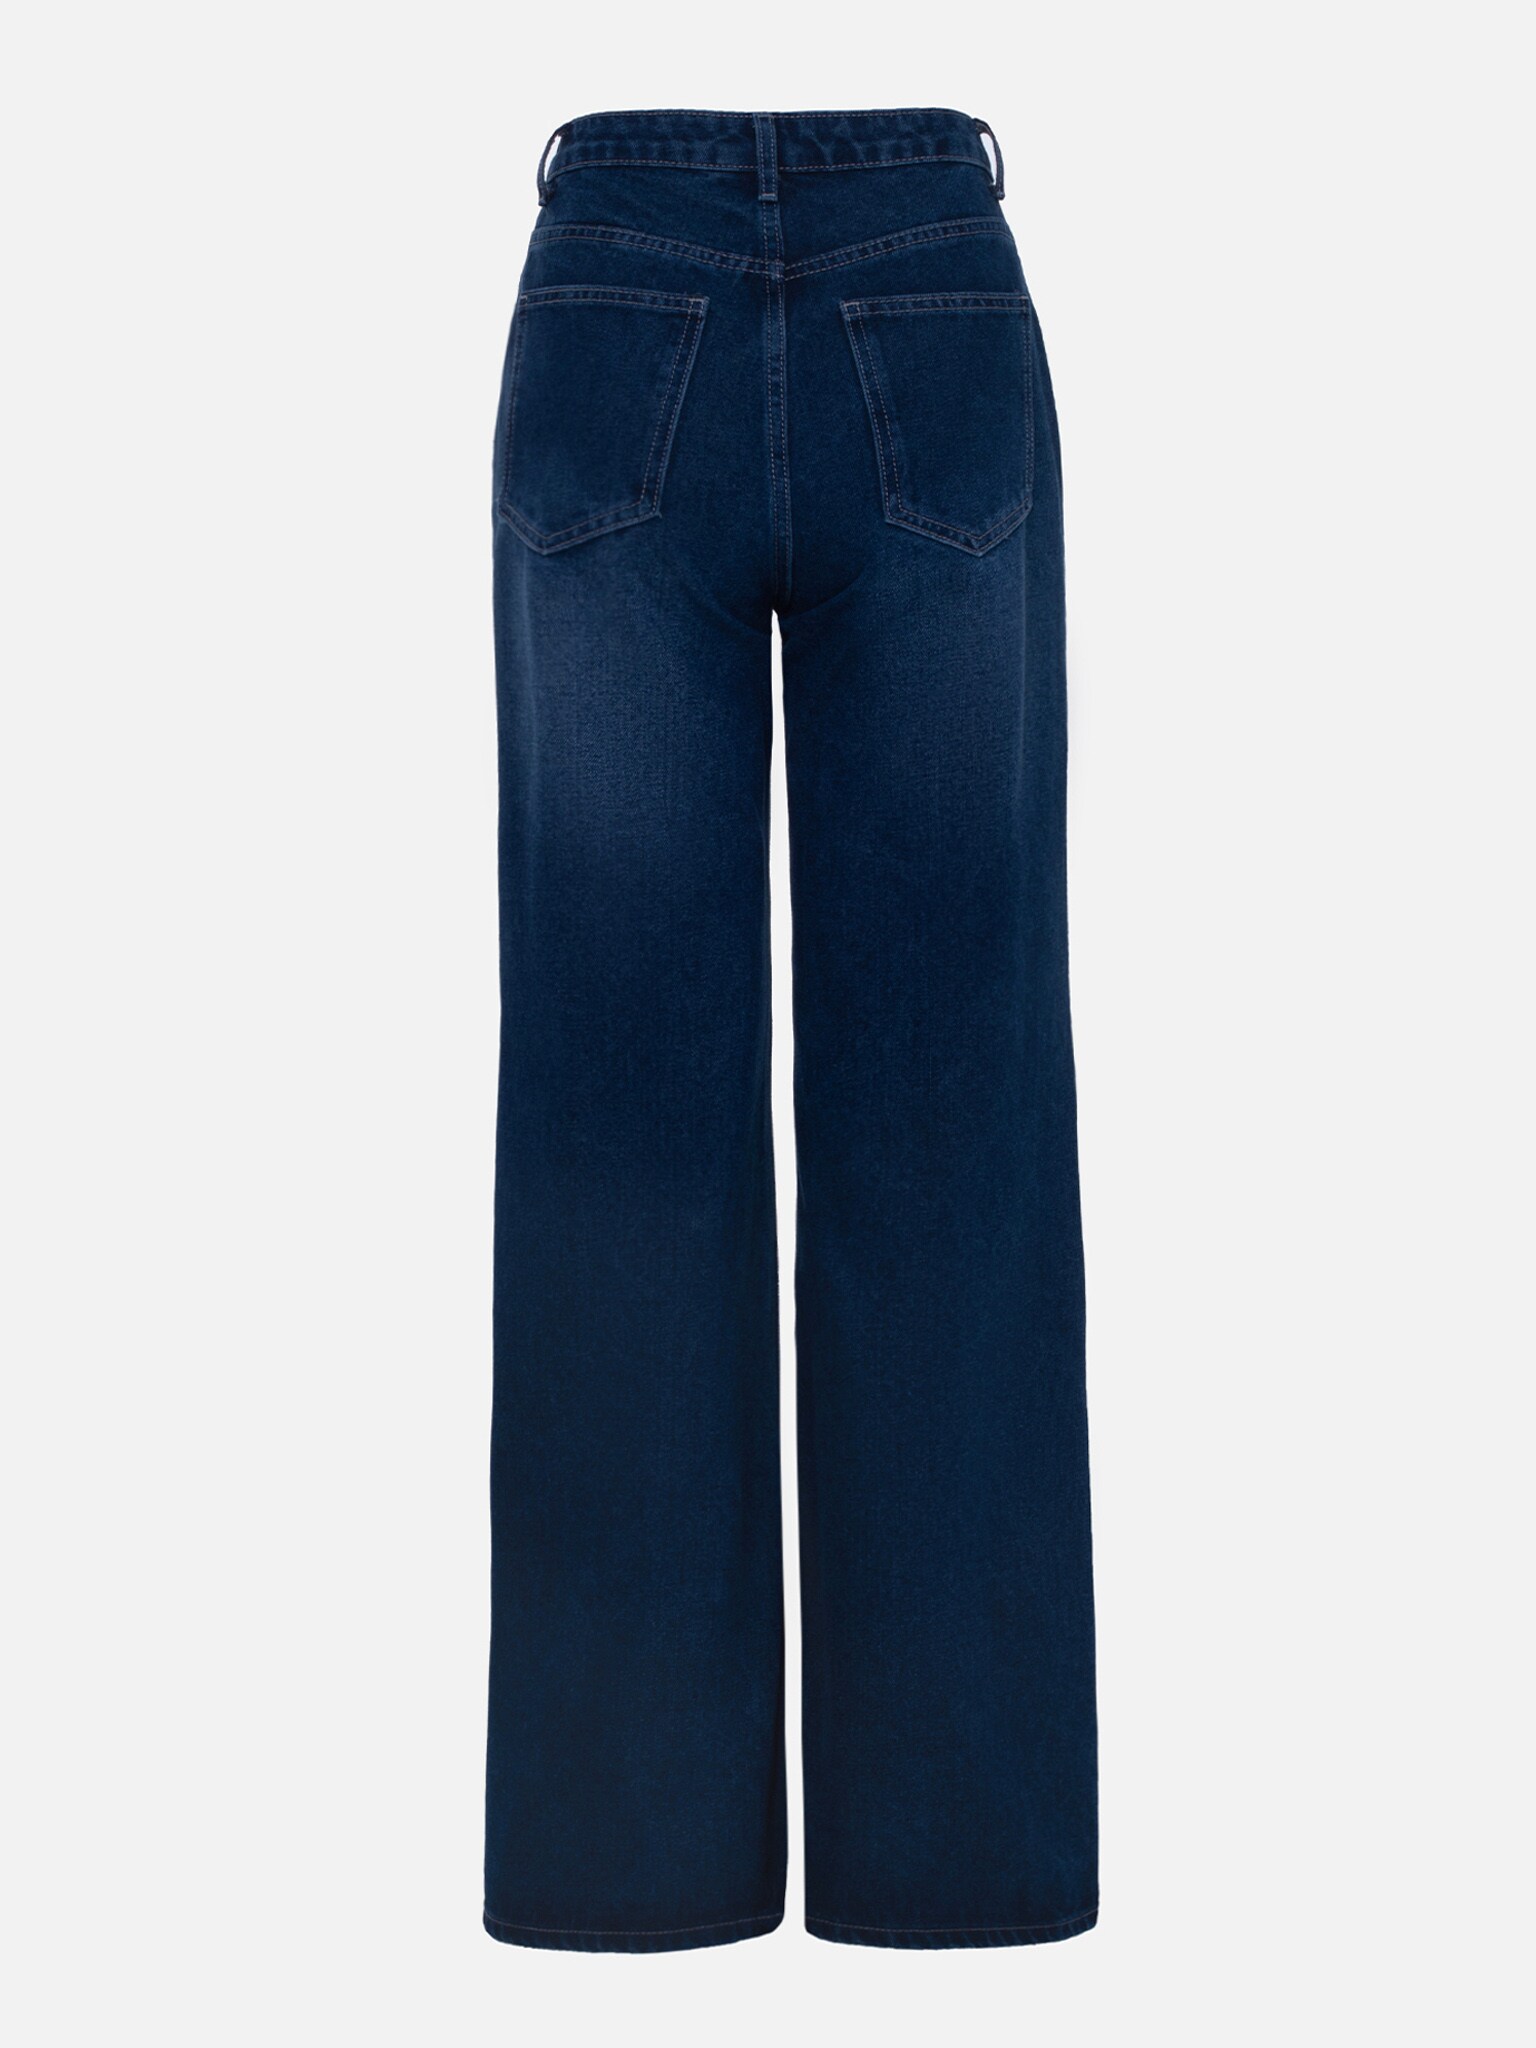 High-waisted jeans with metal fastening :: LICHI - Online fashion store